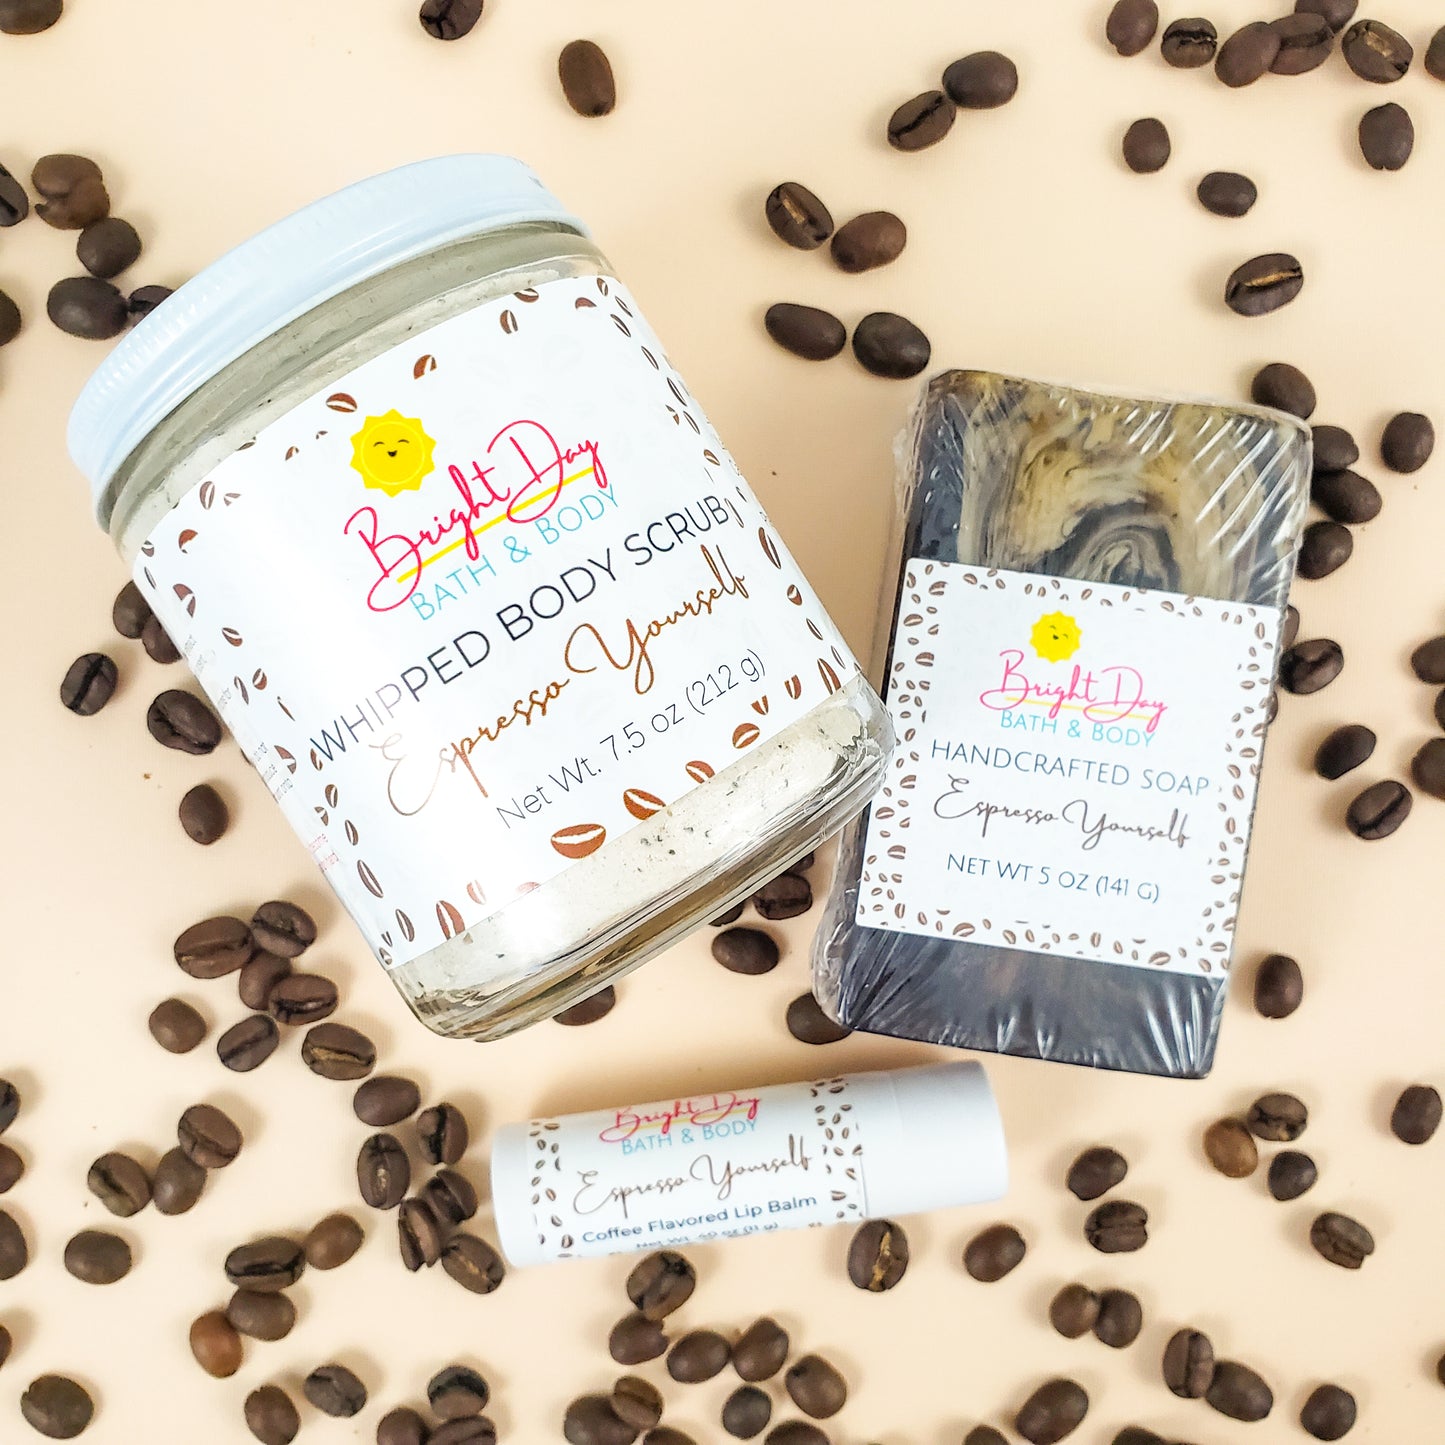 a Espresso Yourself body scrub, soap bar & lip balm on a tan background, surrounded by coffee beans